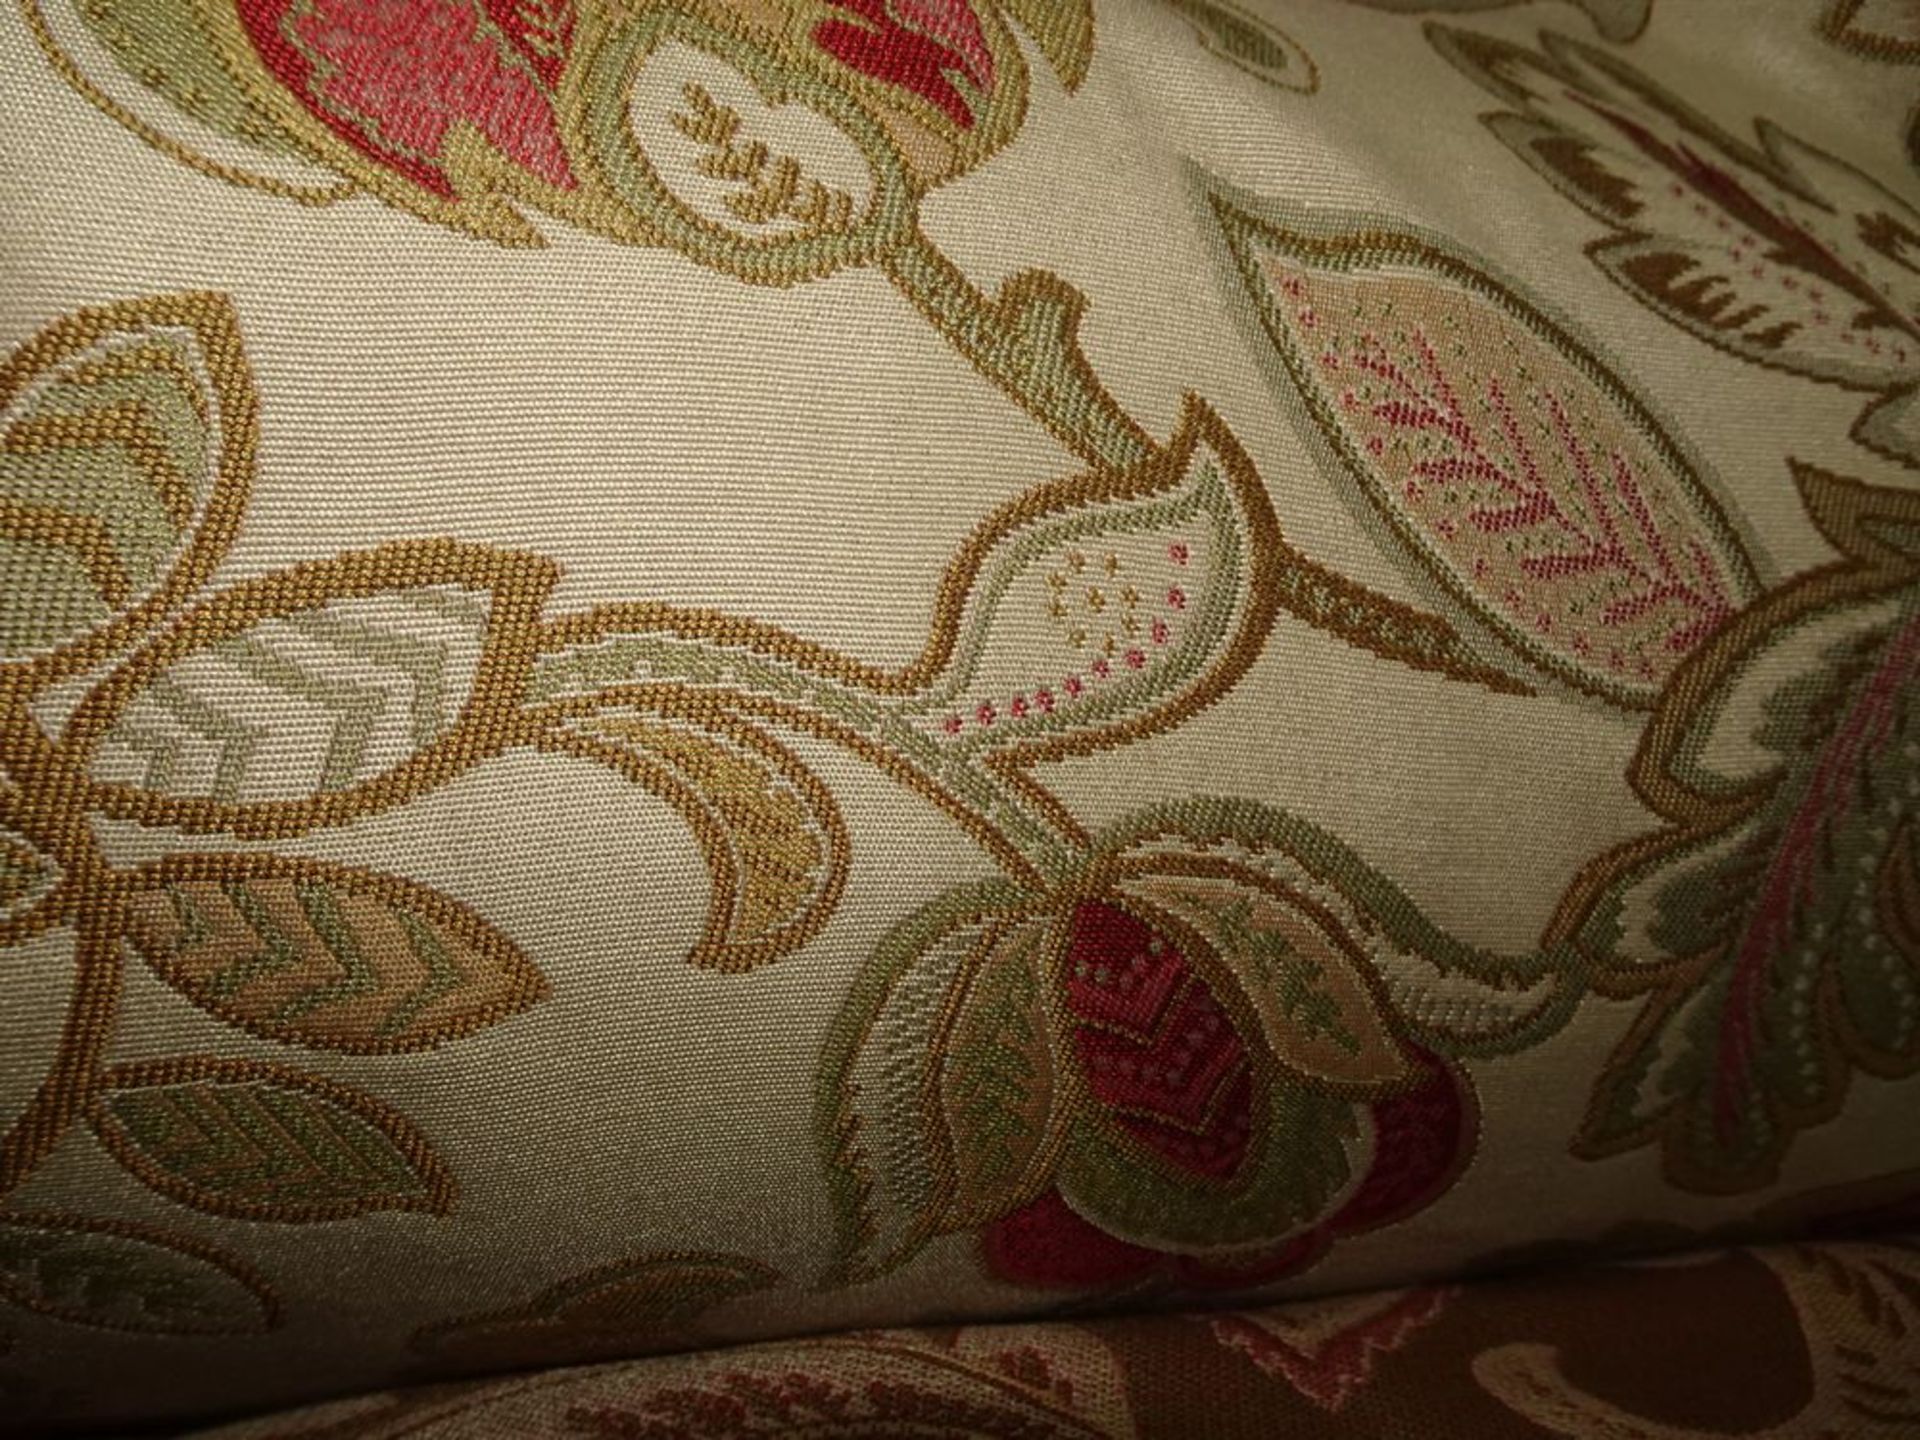 ROLL OF UPHOLSTERY FABRIC - GARDEN- (APPROX 41.5 YDS) - Image 3 of 4